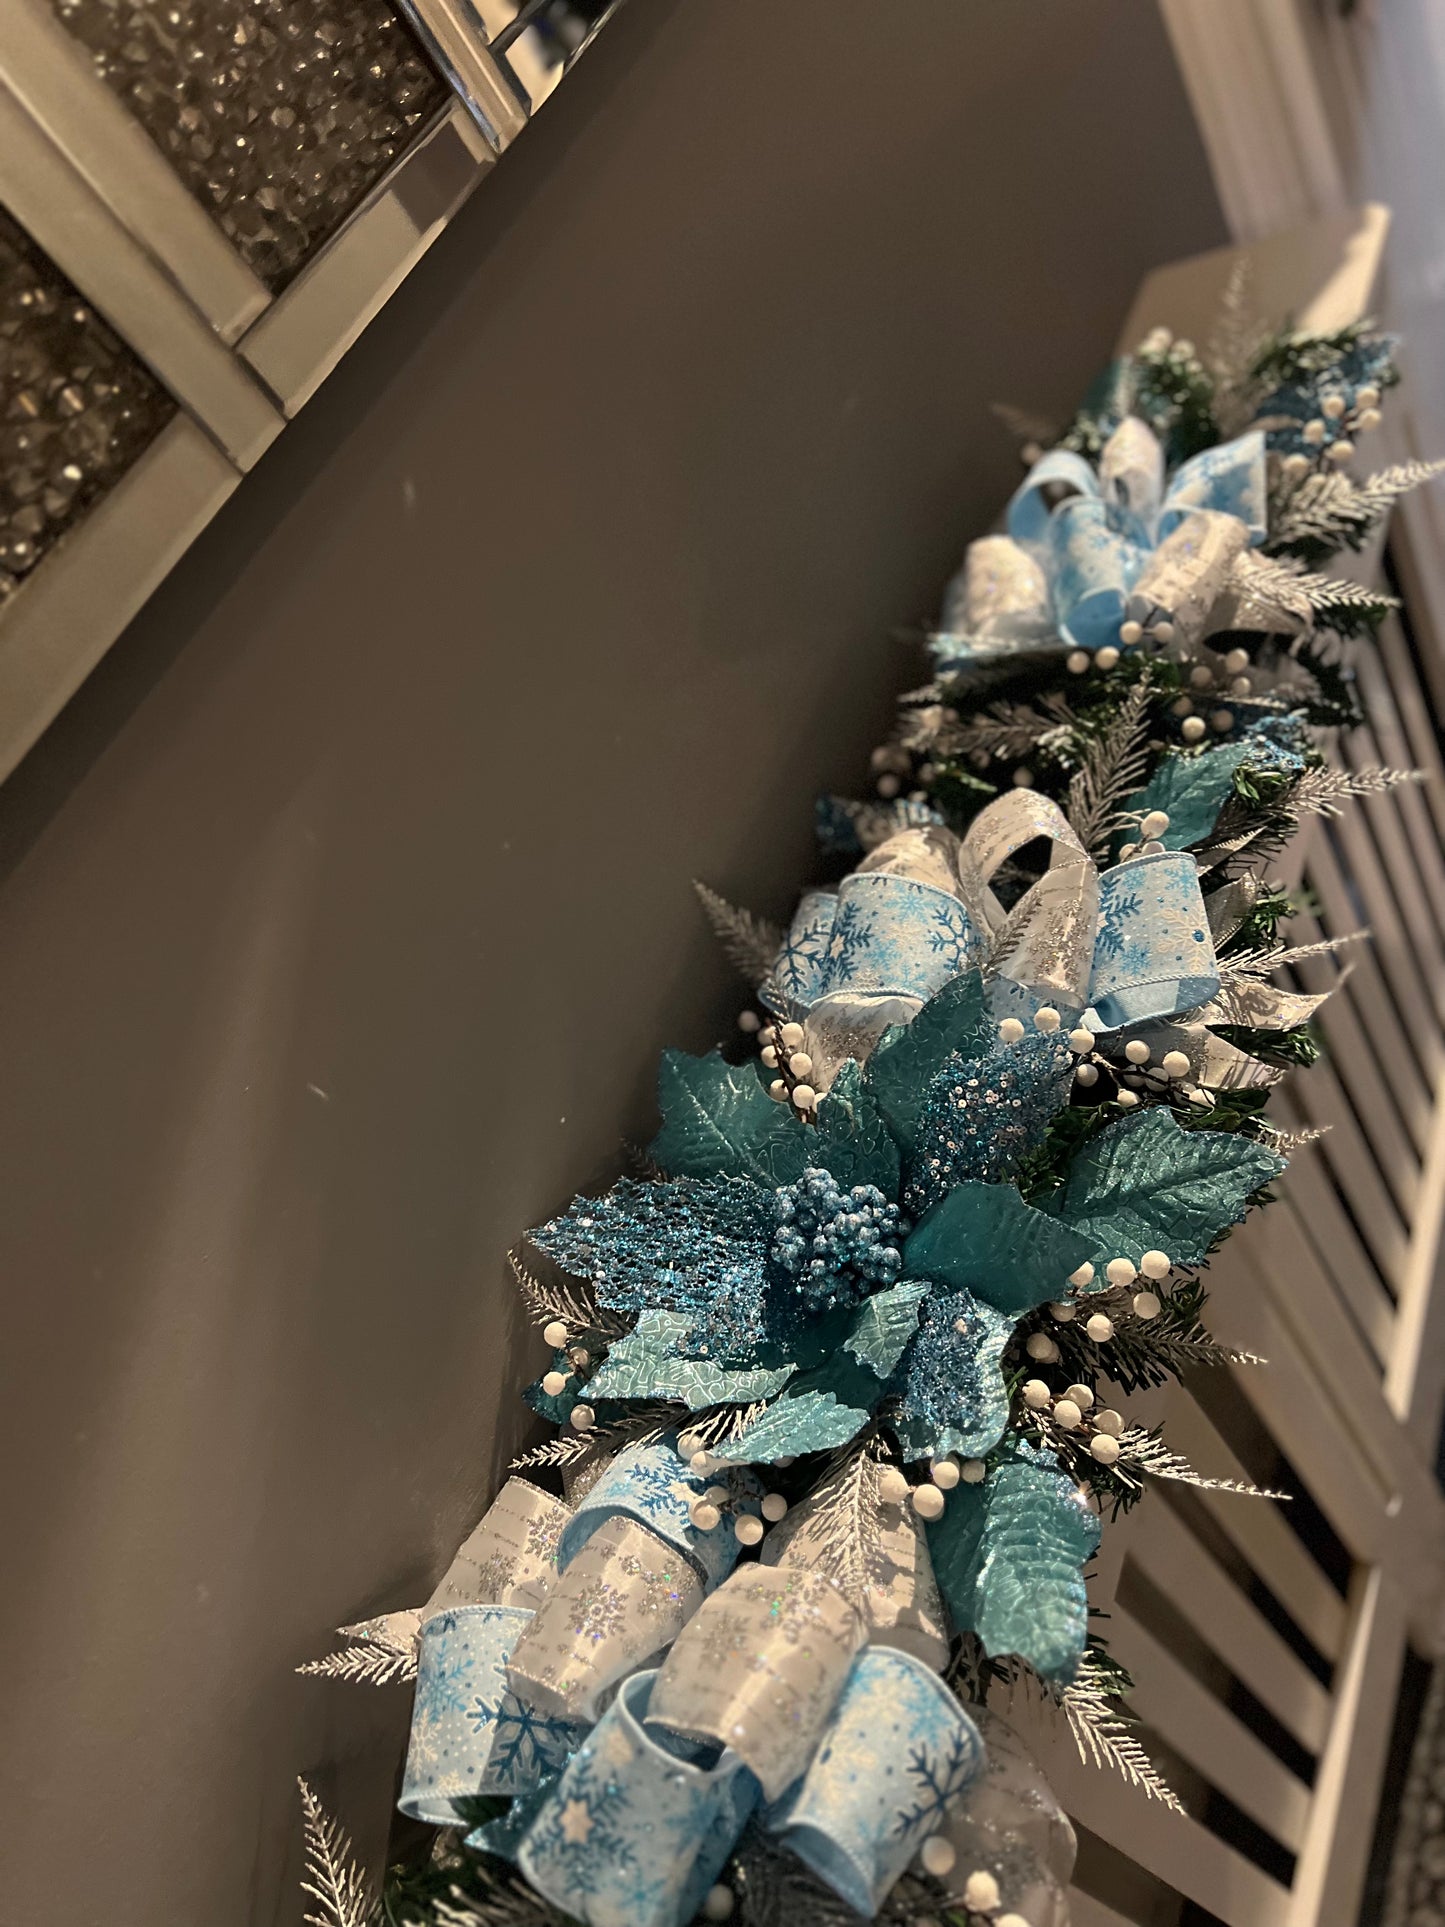 DELUXE 1.25mtr GARLAND ICE BLUE/SILVER/WHITE